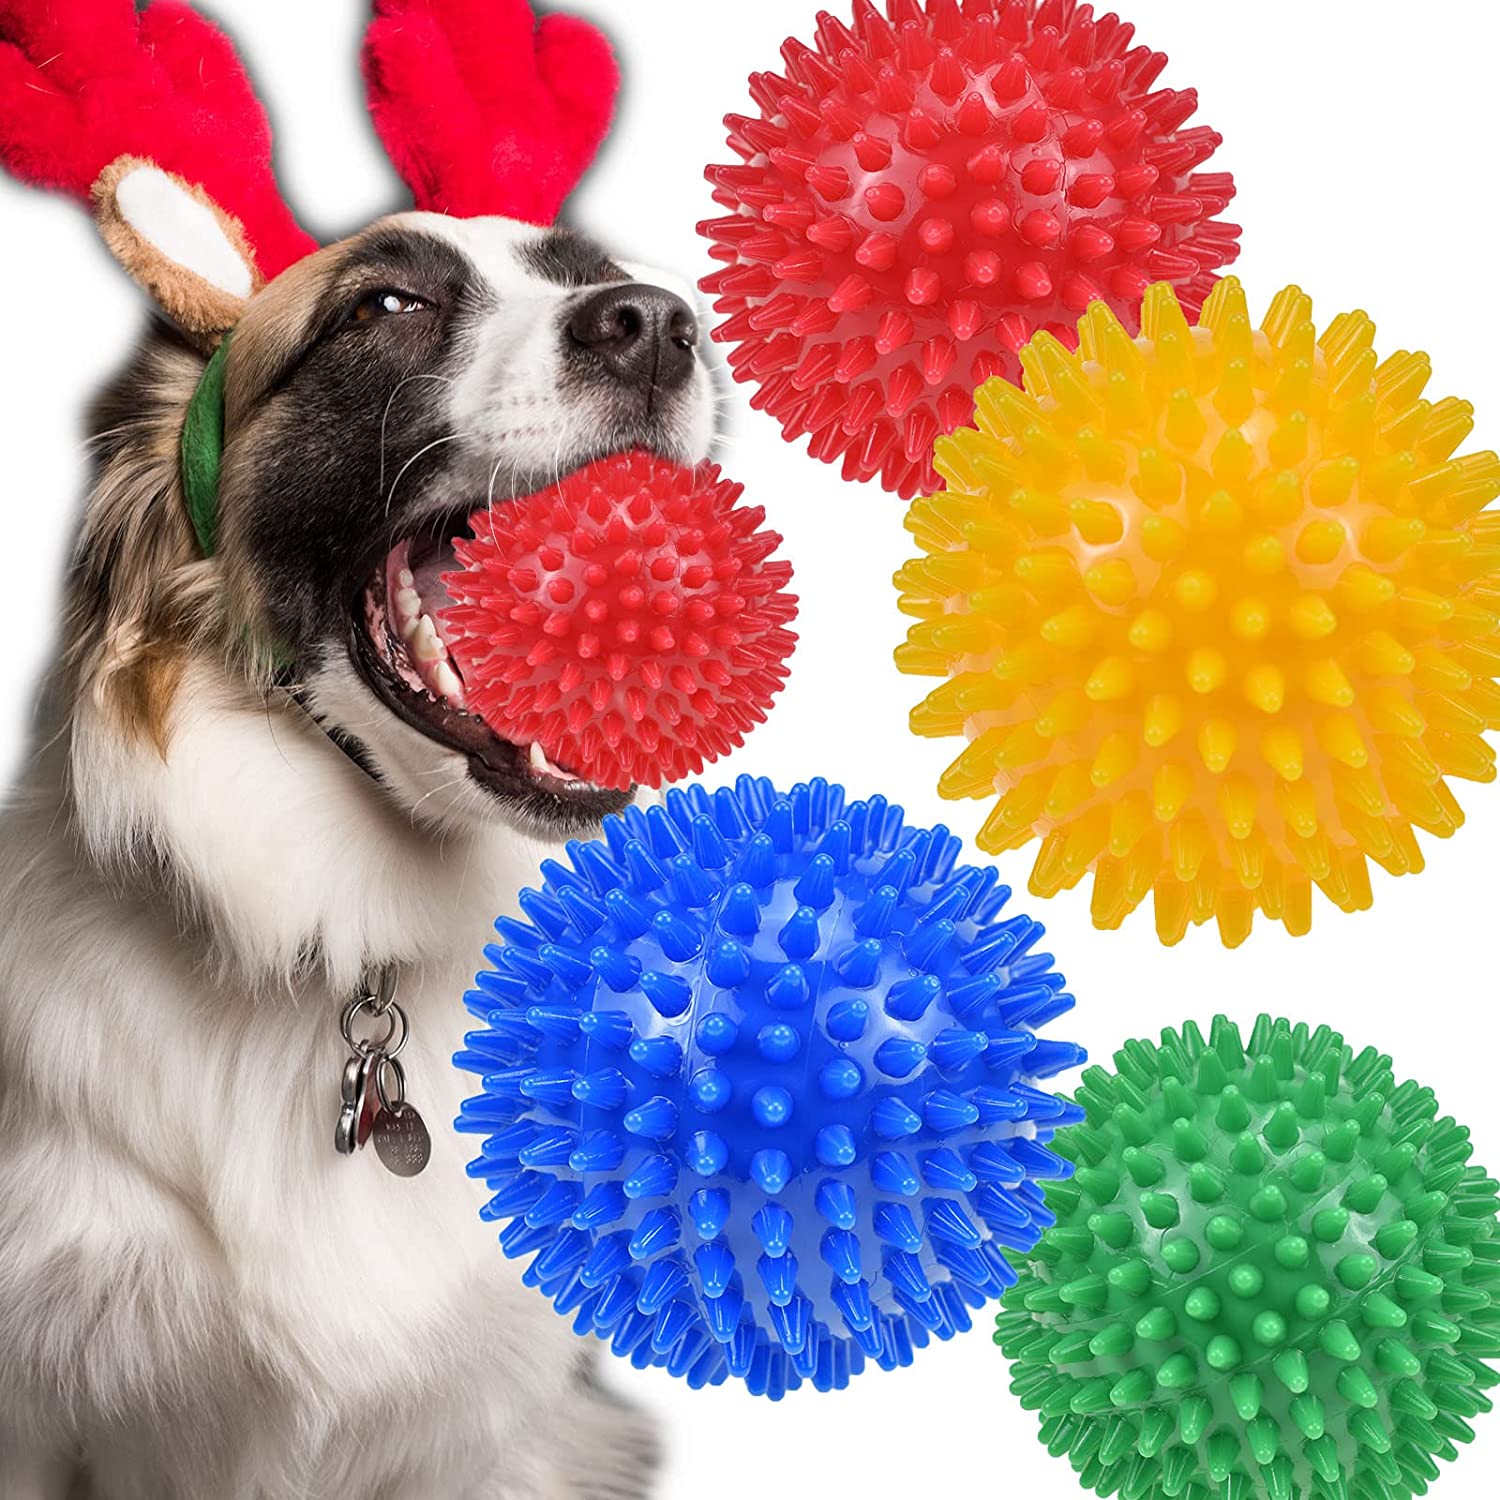 3 Pcs/pack Tearribles Pull Apart Dog Toy Balls Large Dogs Squeaky Small